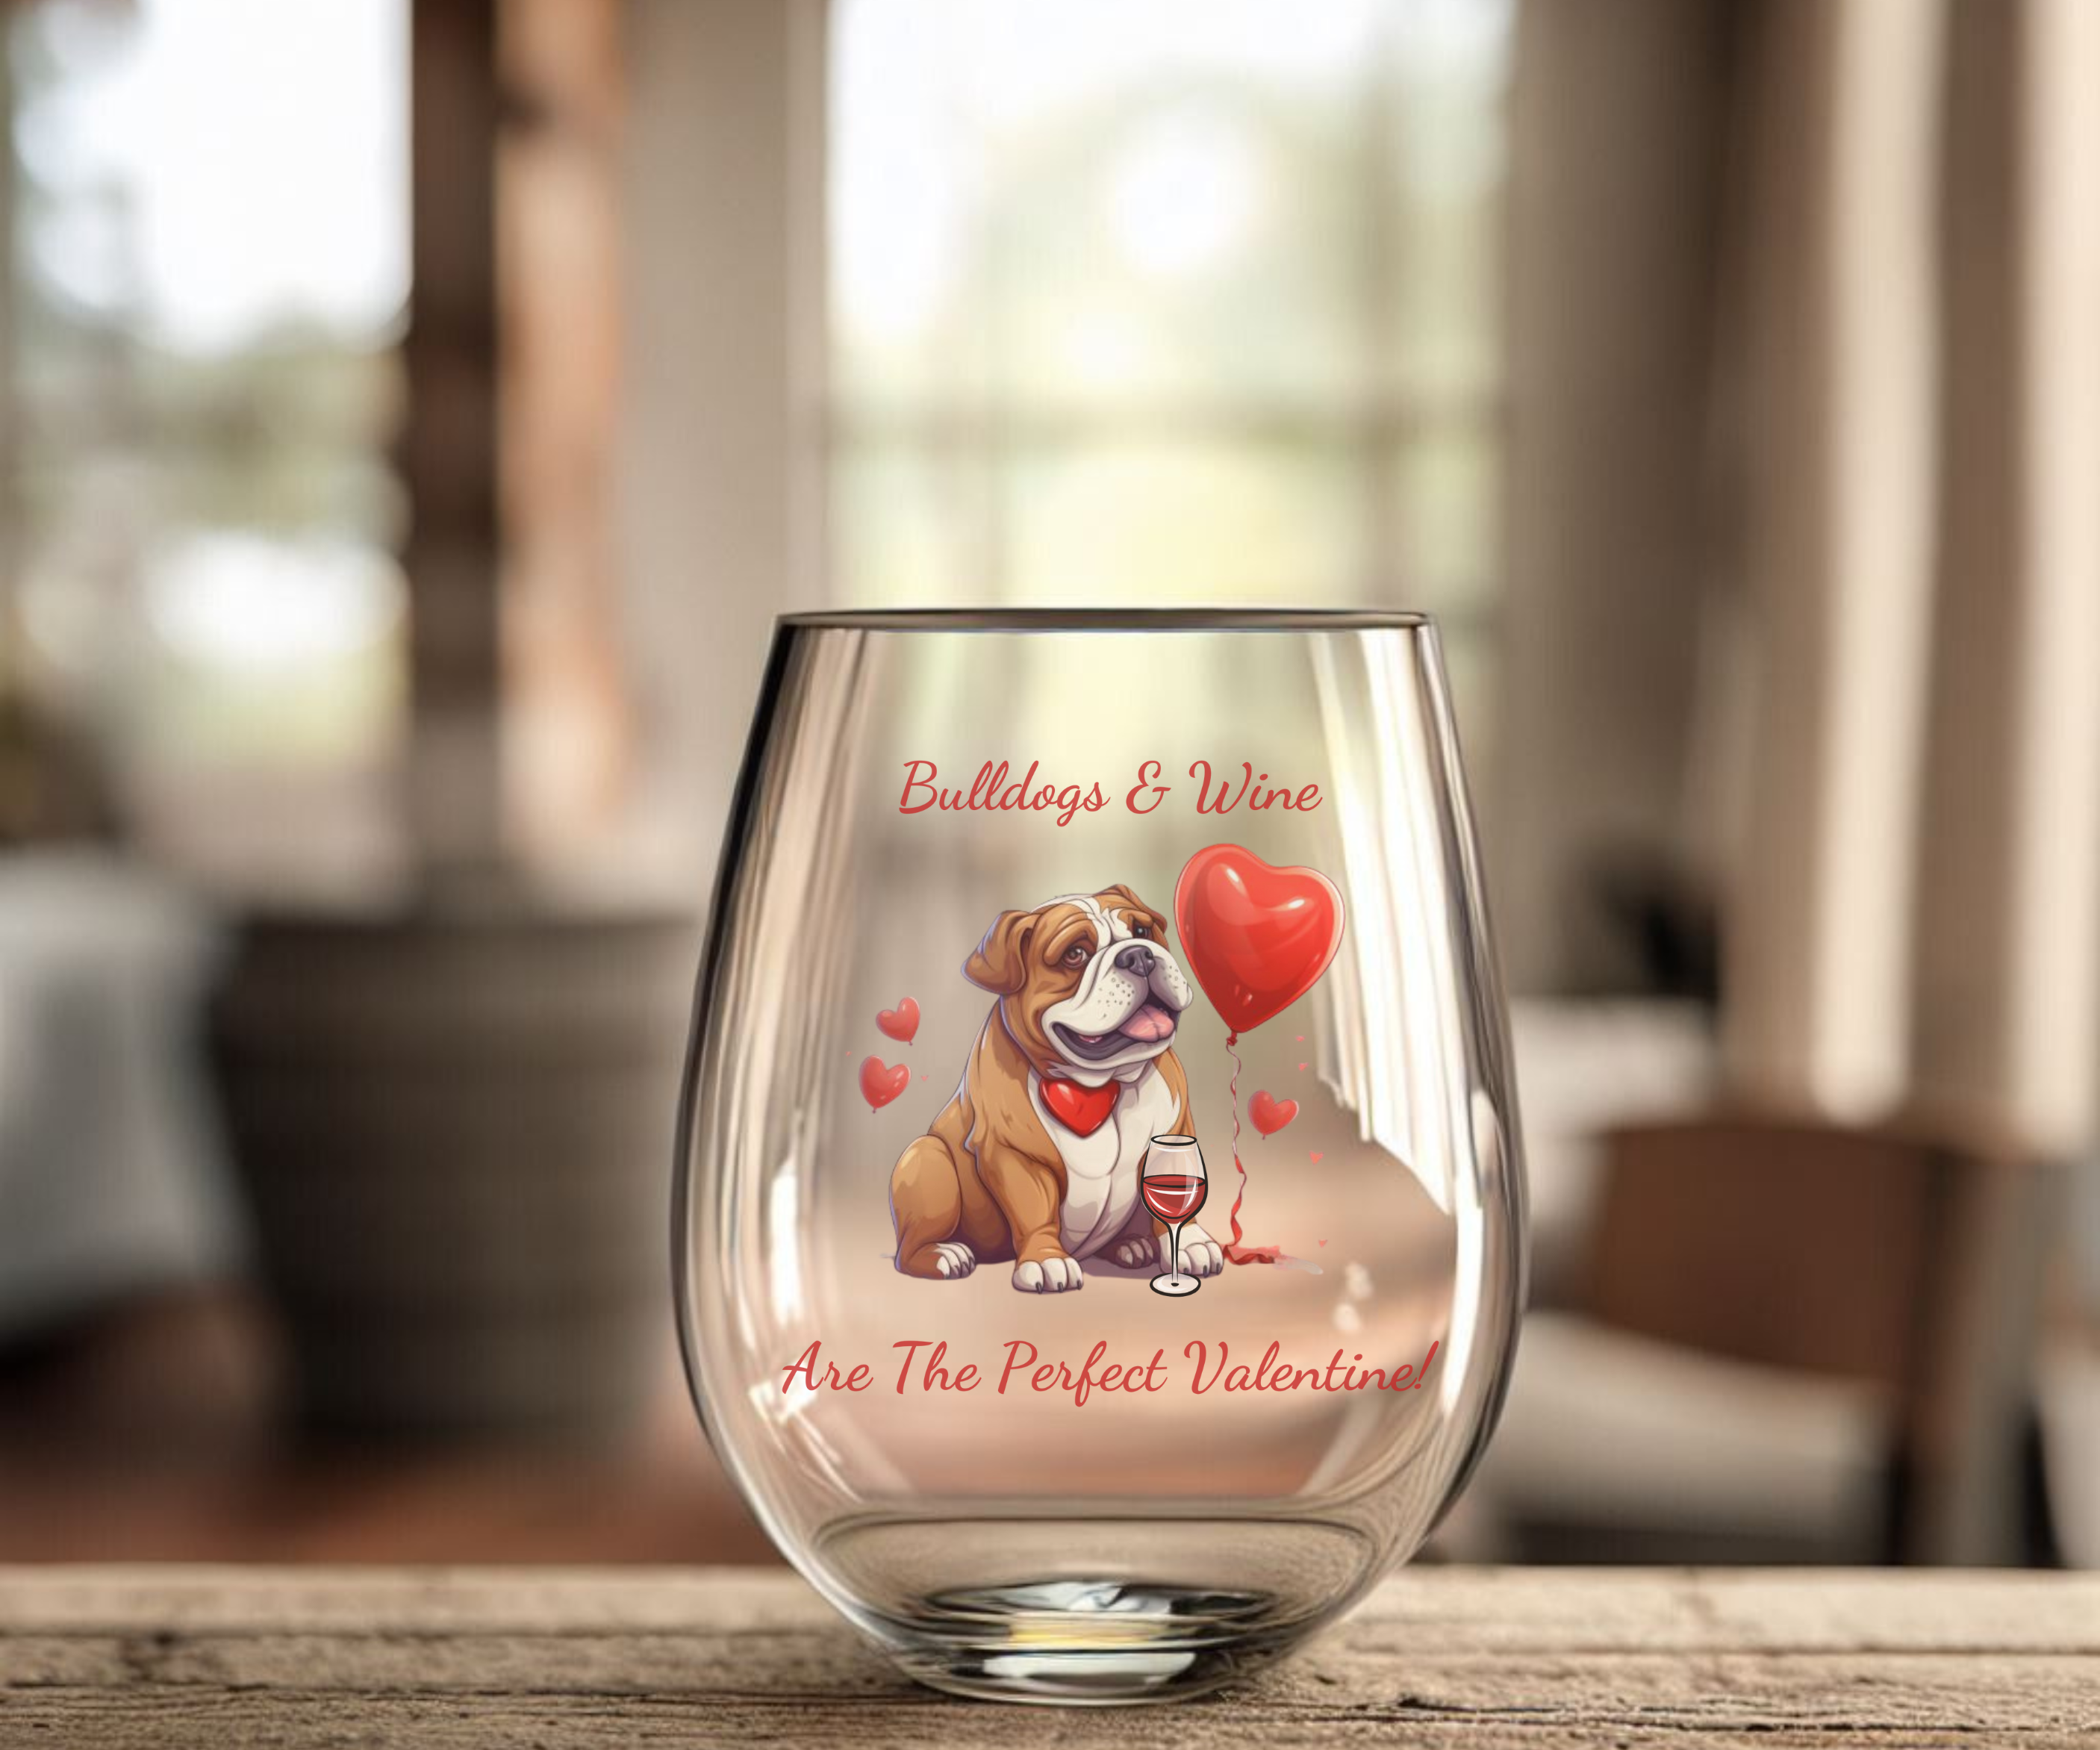 Bulldogs & Wine Are the Perfect Valentine! Stemless Wine Glass - Brown English